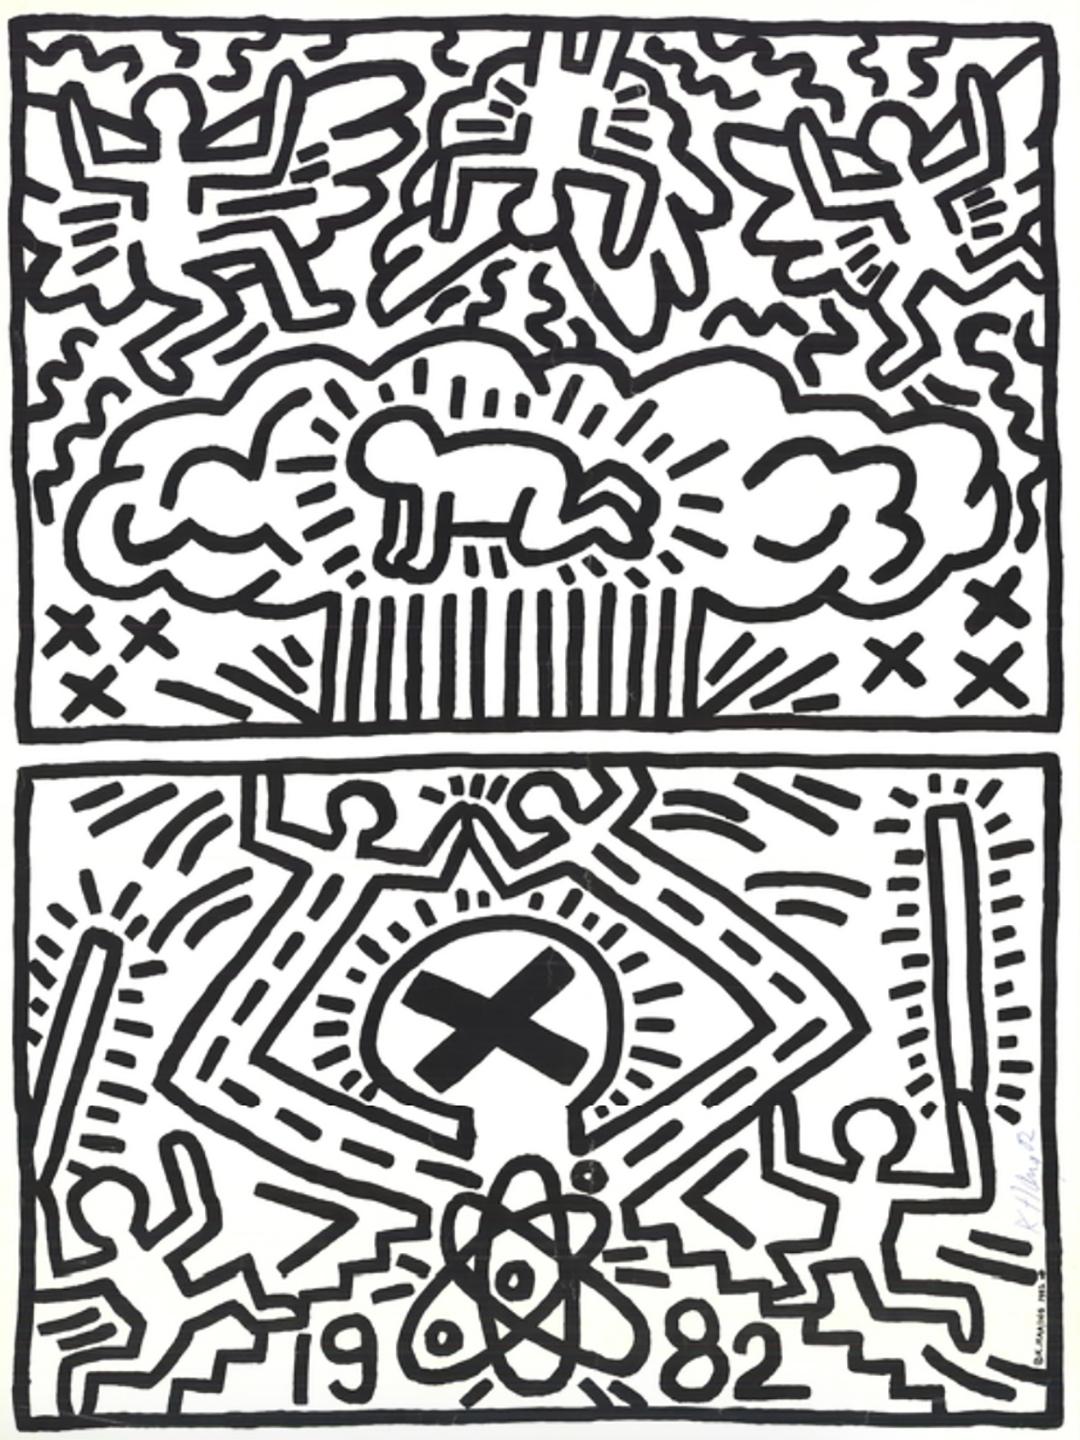 Poster for Nuclear Disarmament - Print by Keith Haring